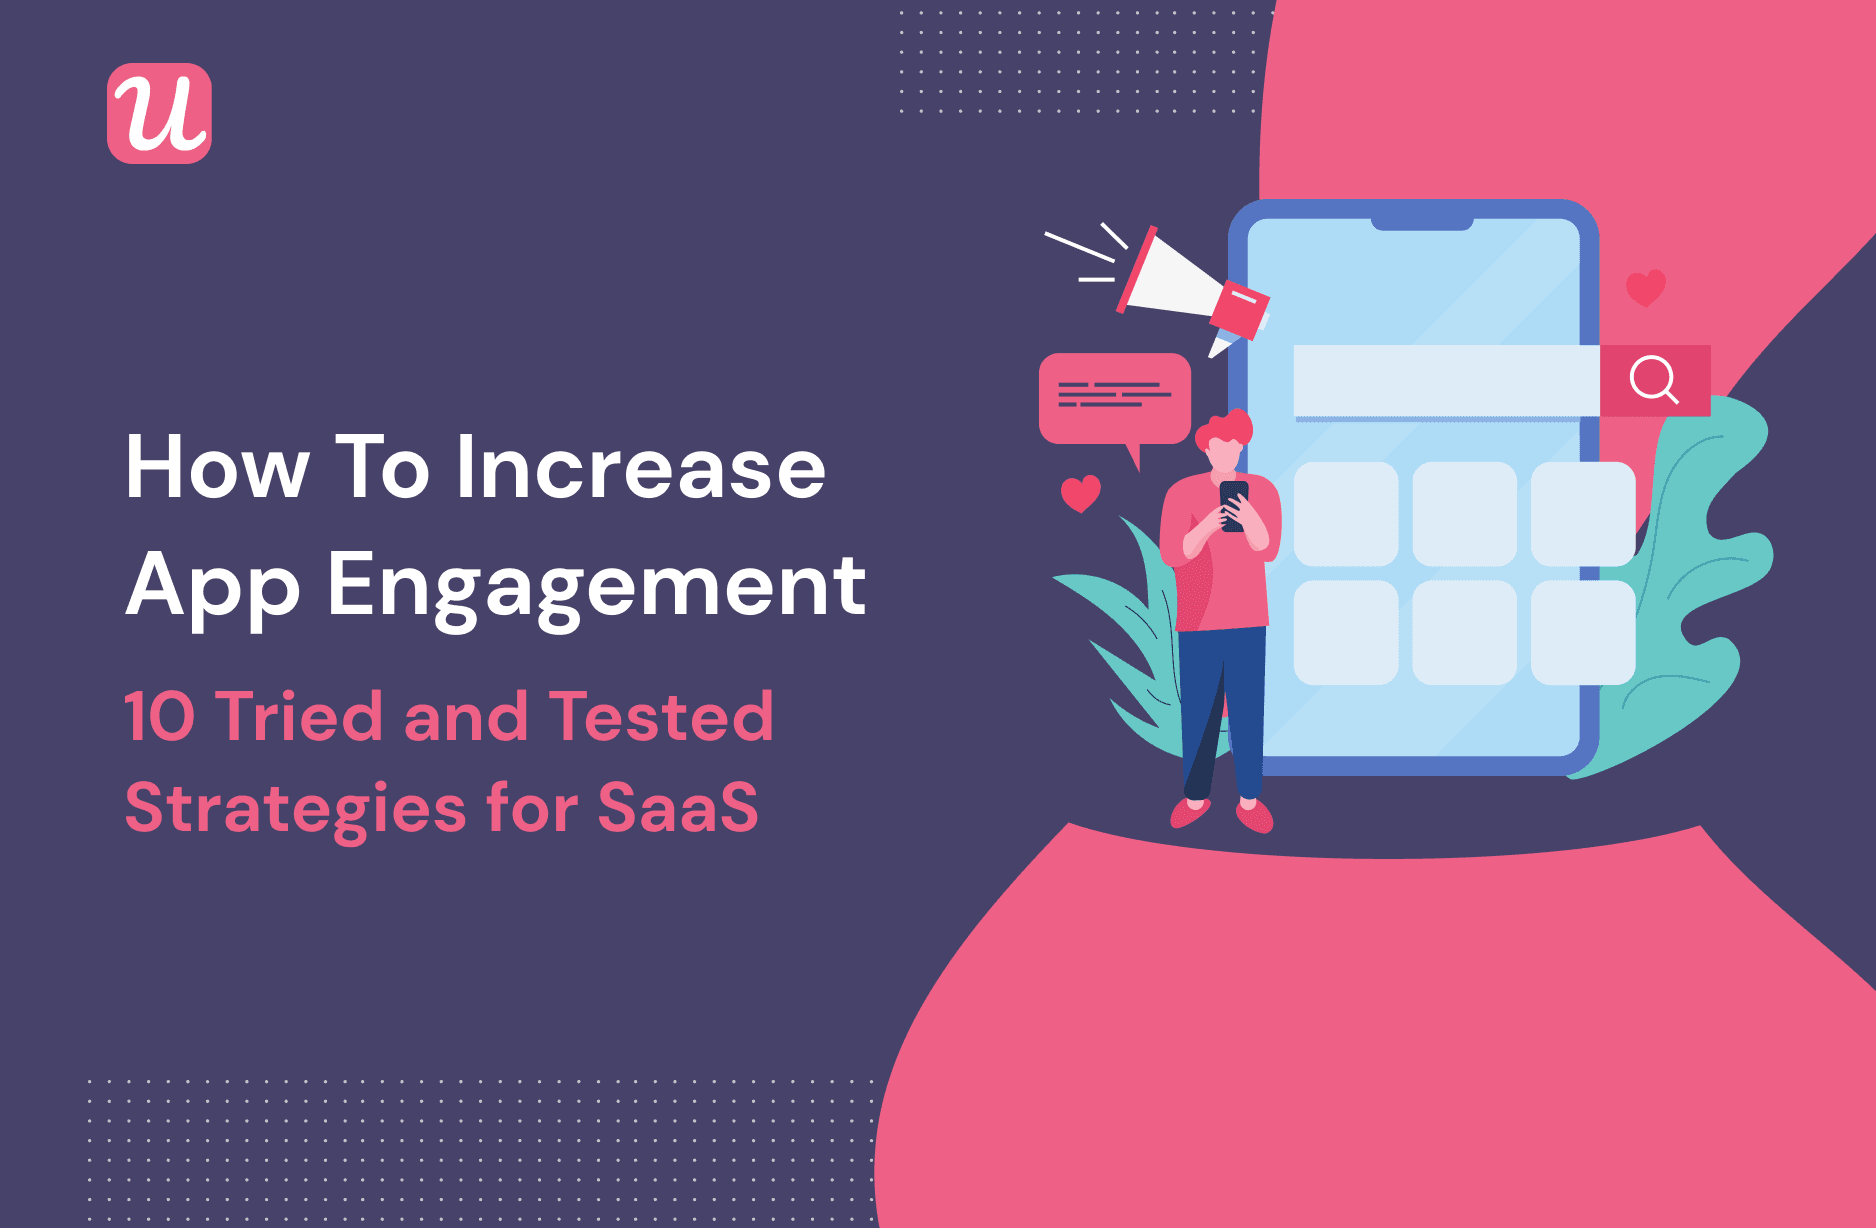 How to Increase App Engagement - 10 Tried and Tested Strategies for SaaS